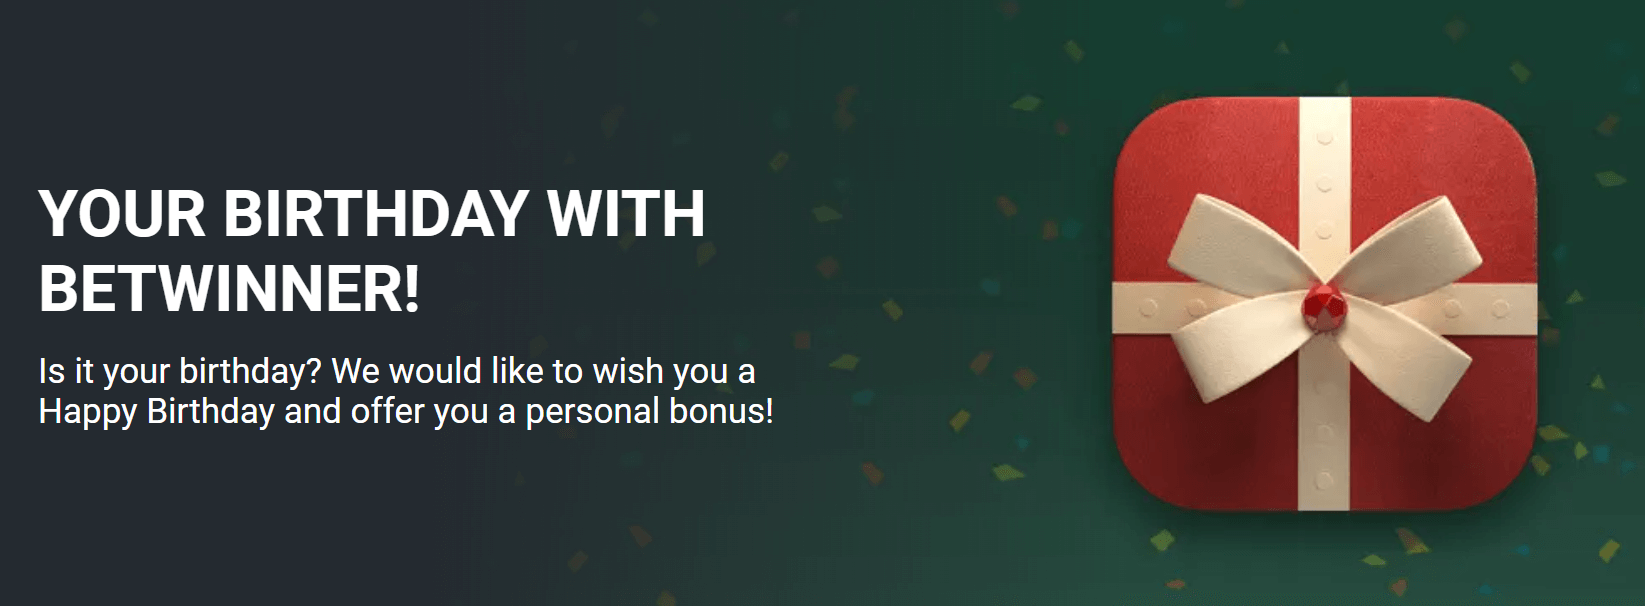 YOUR BIRTHDAY WITH BETWINNER!